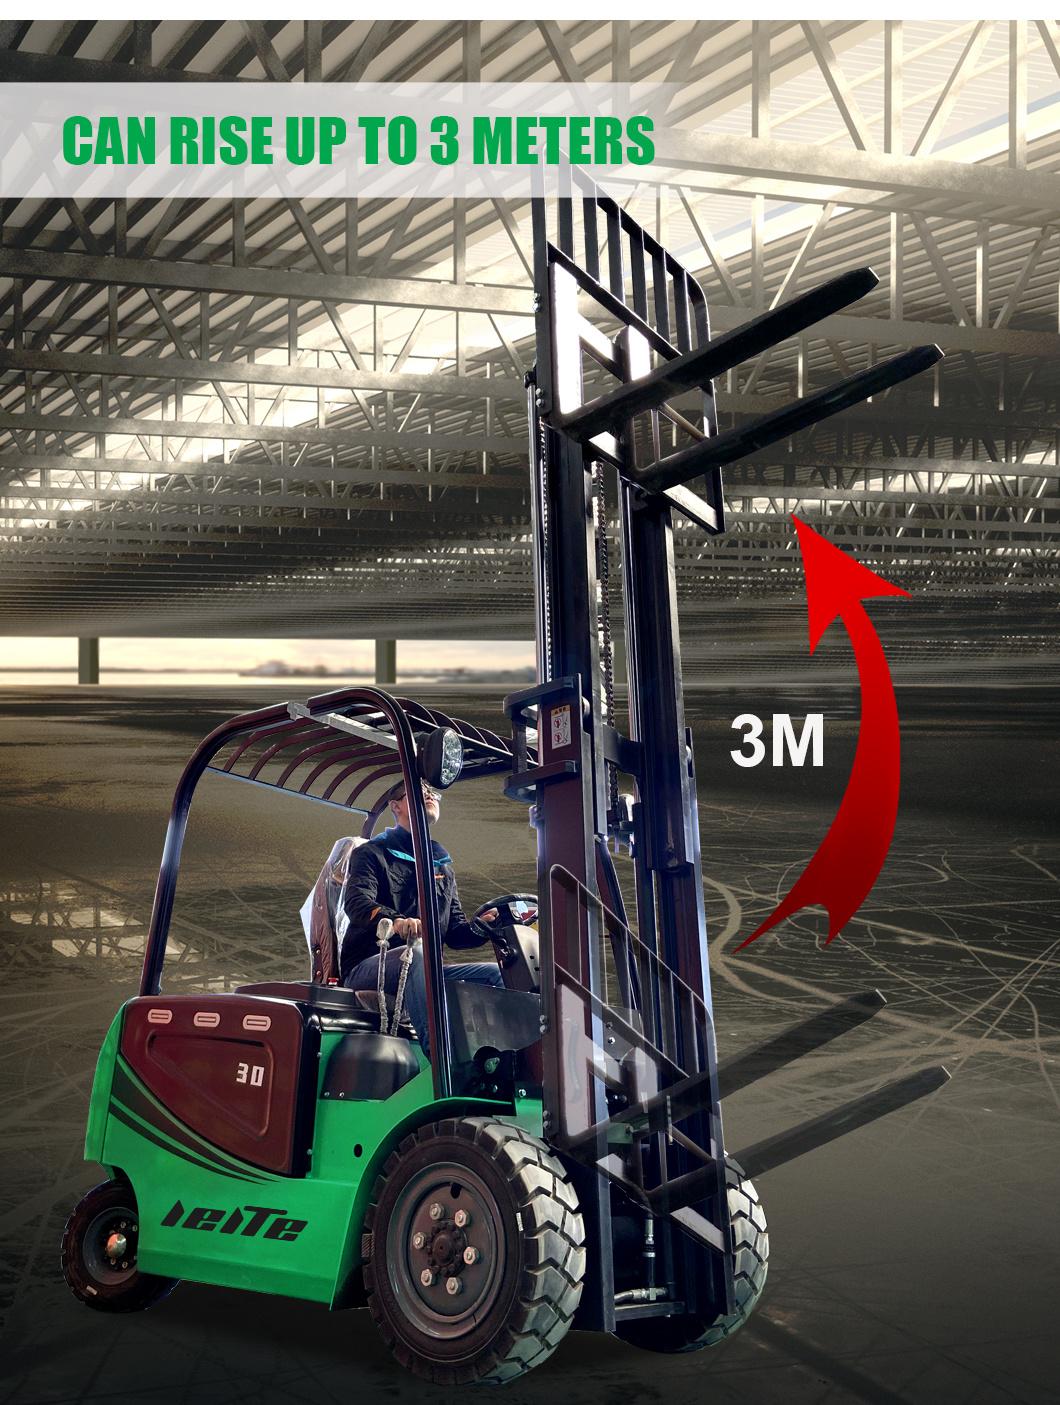 Factory Sale Various Widely Used Electric Forklift Truck New 1.5 Ton 2 Ton 3 Ton Electric Forklift Cheap Price